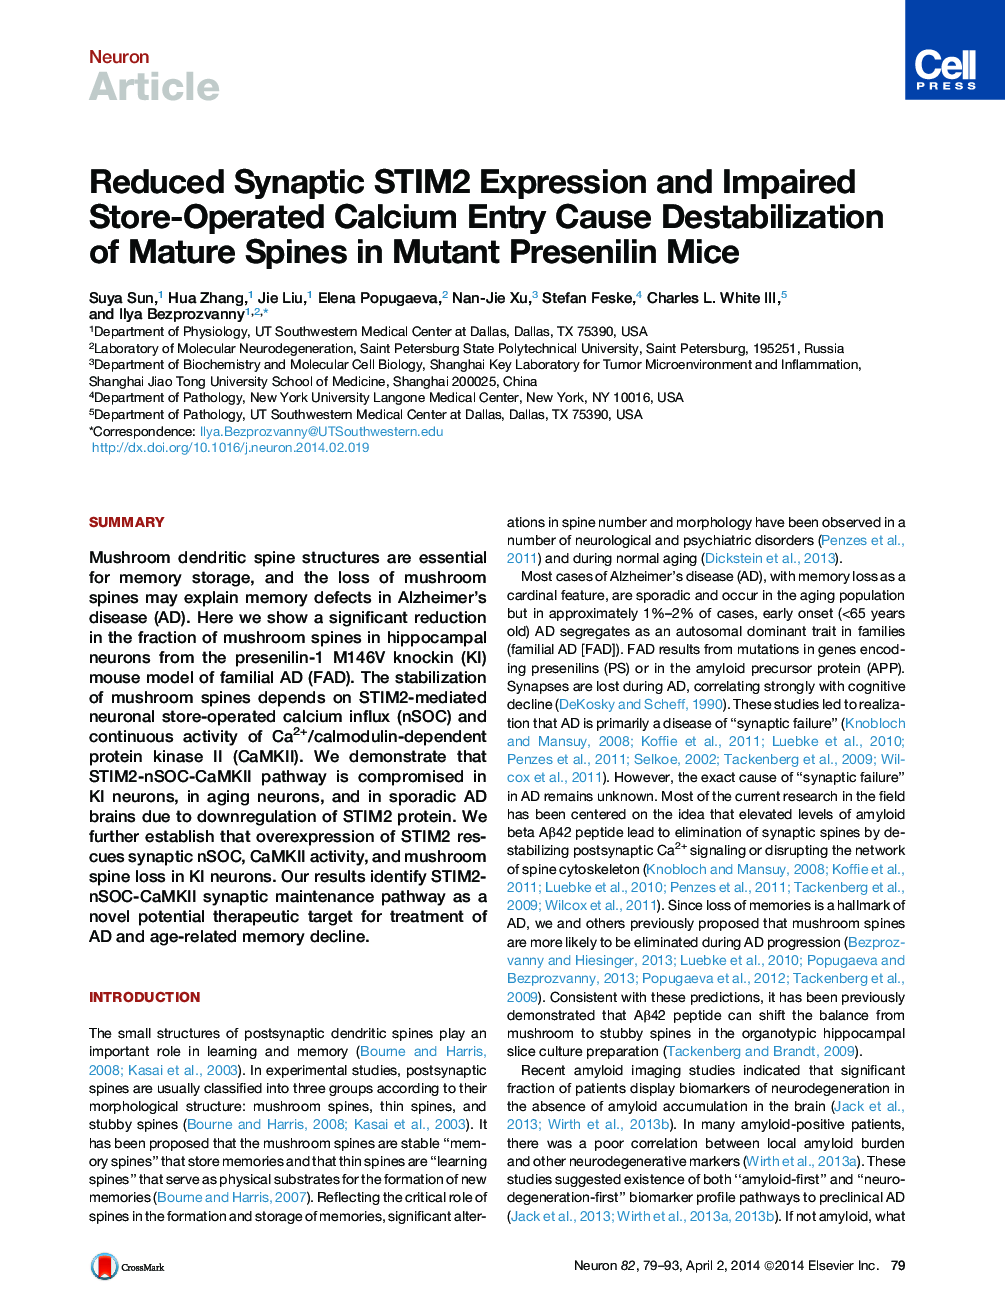 Reduced Synaptic STIM2 Expression and Impaired Store-Operated Calcium Entry Cause Destabilization of Mature Spines in Mutant Presenilin Mice